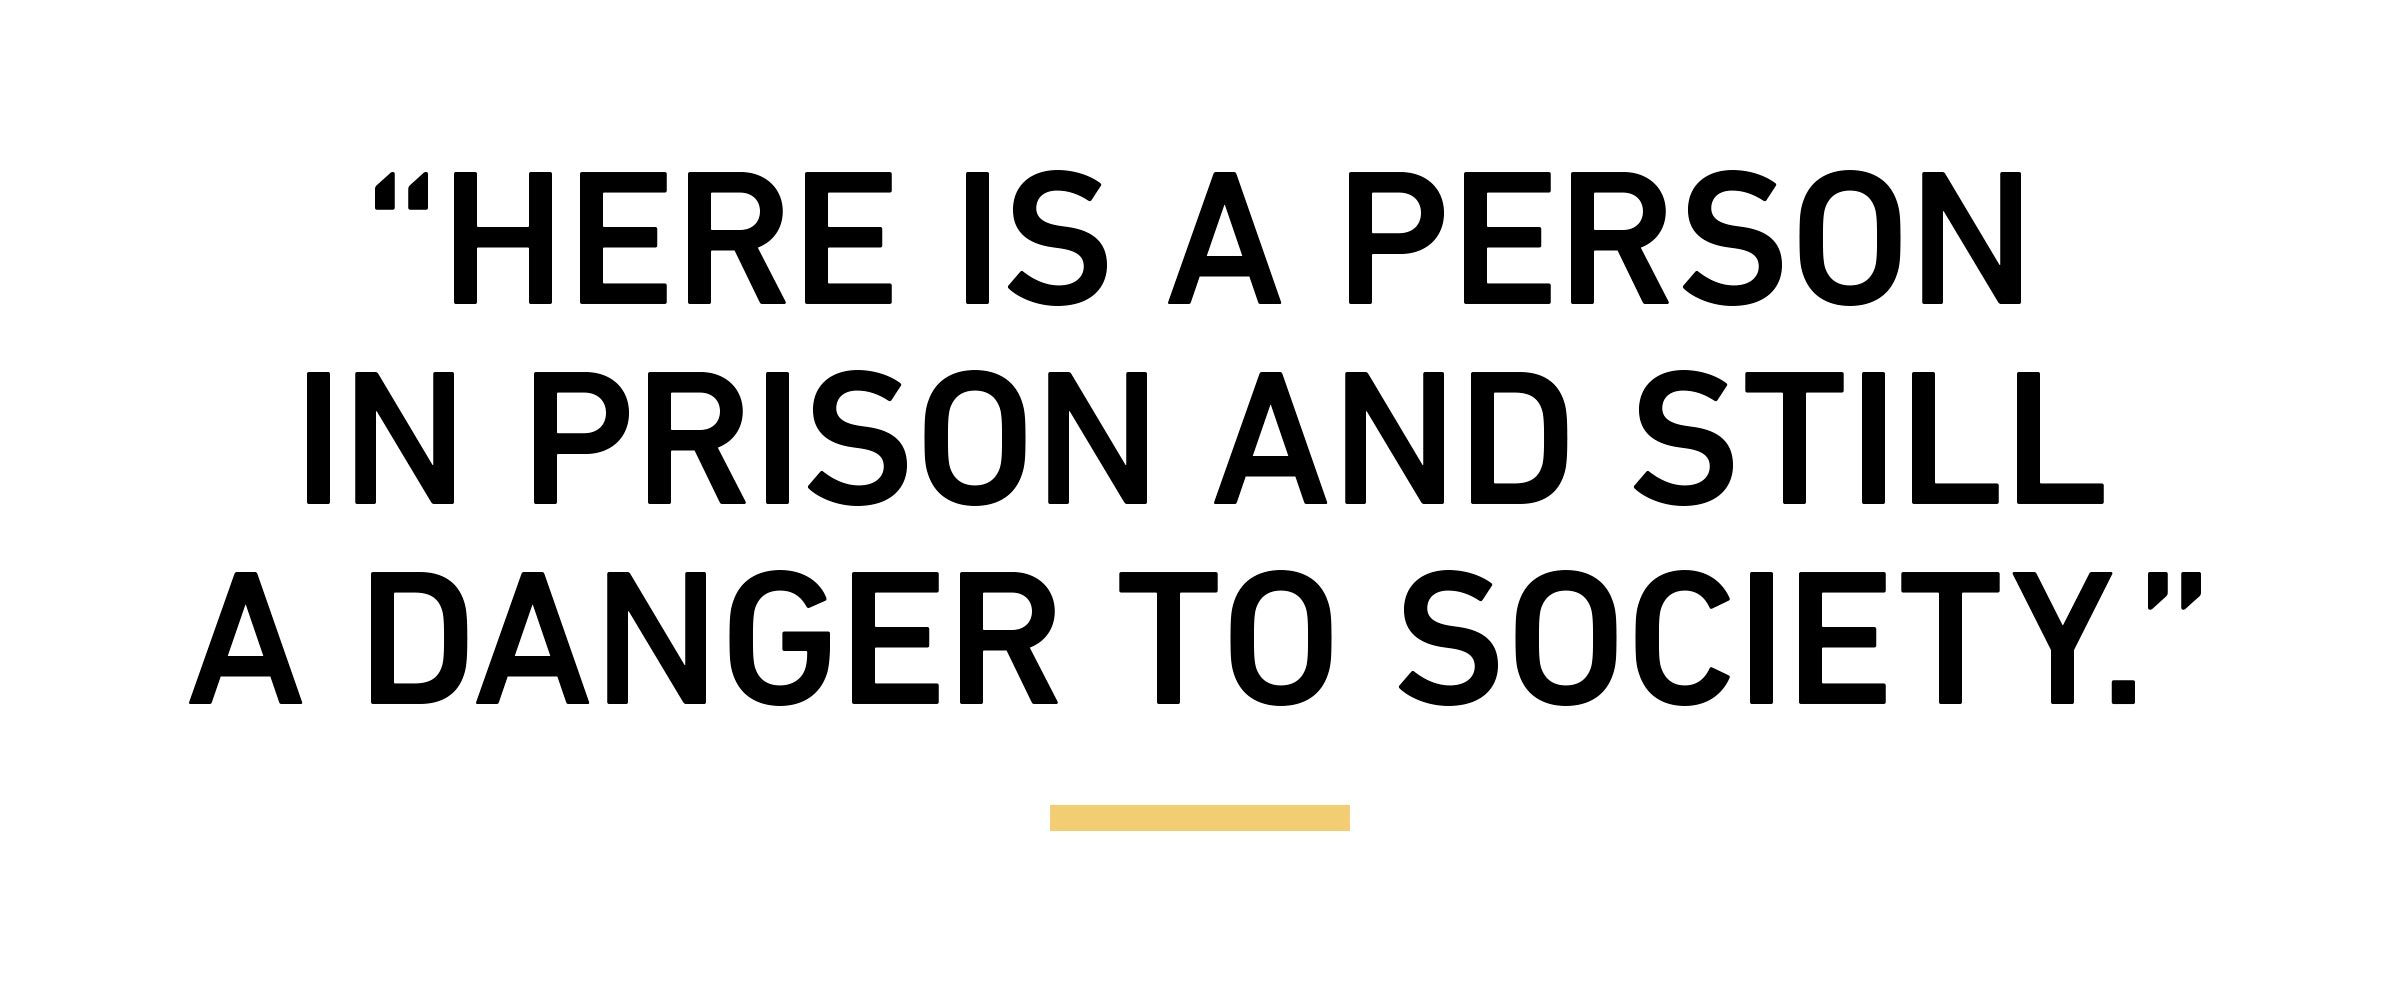 “Here is a person in prison and still a danger to society.”